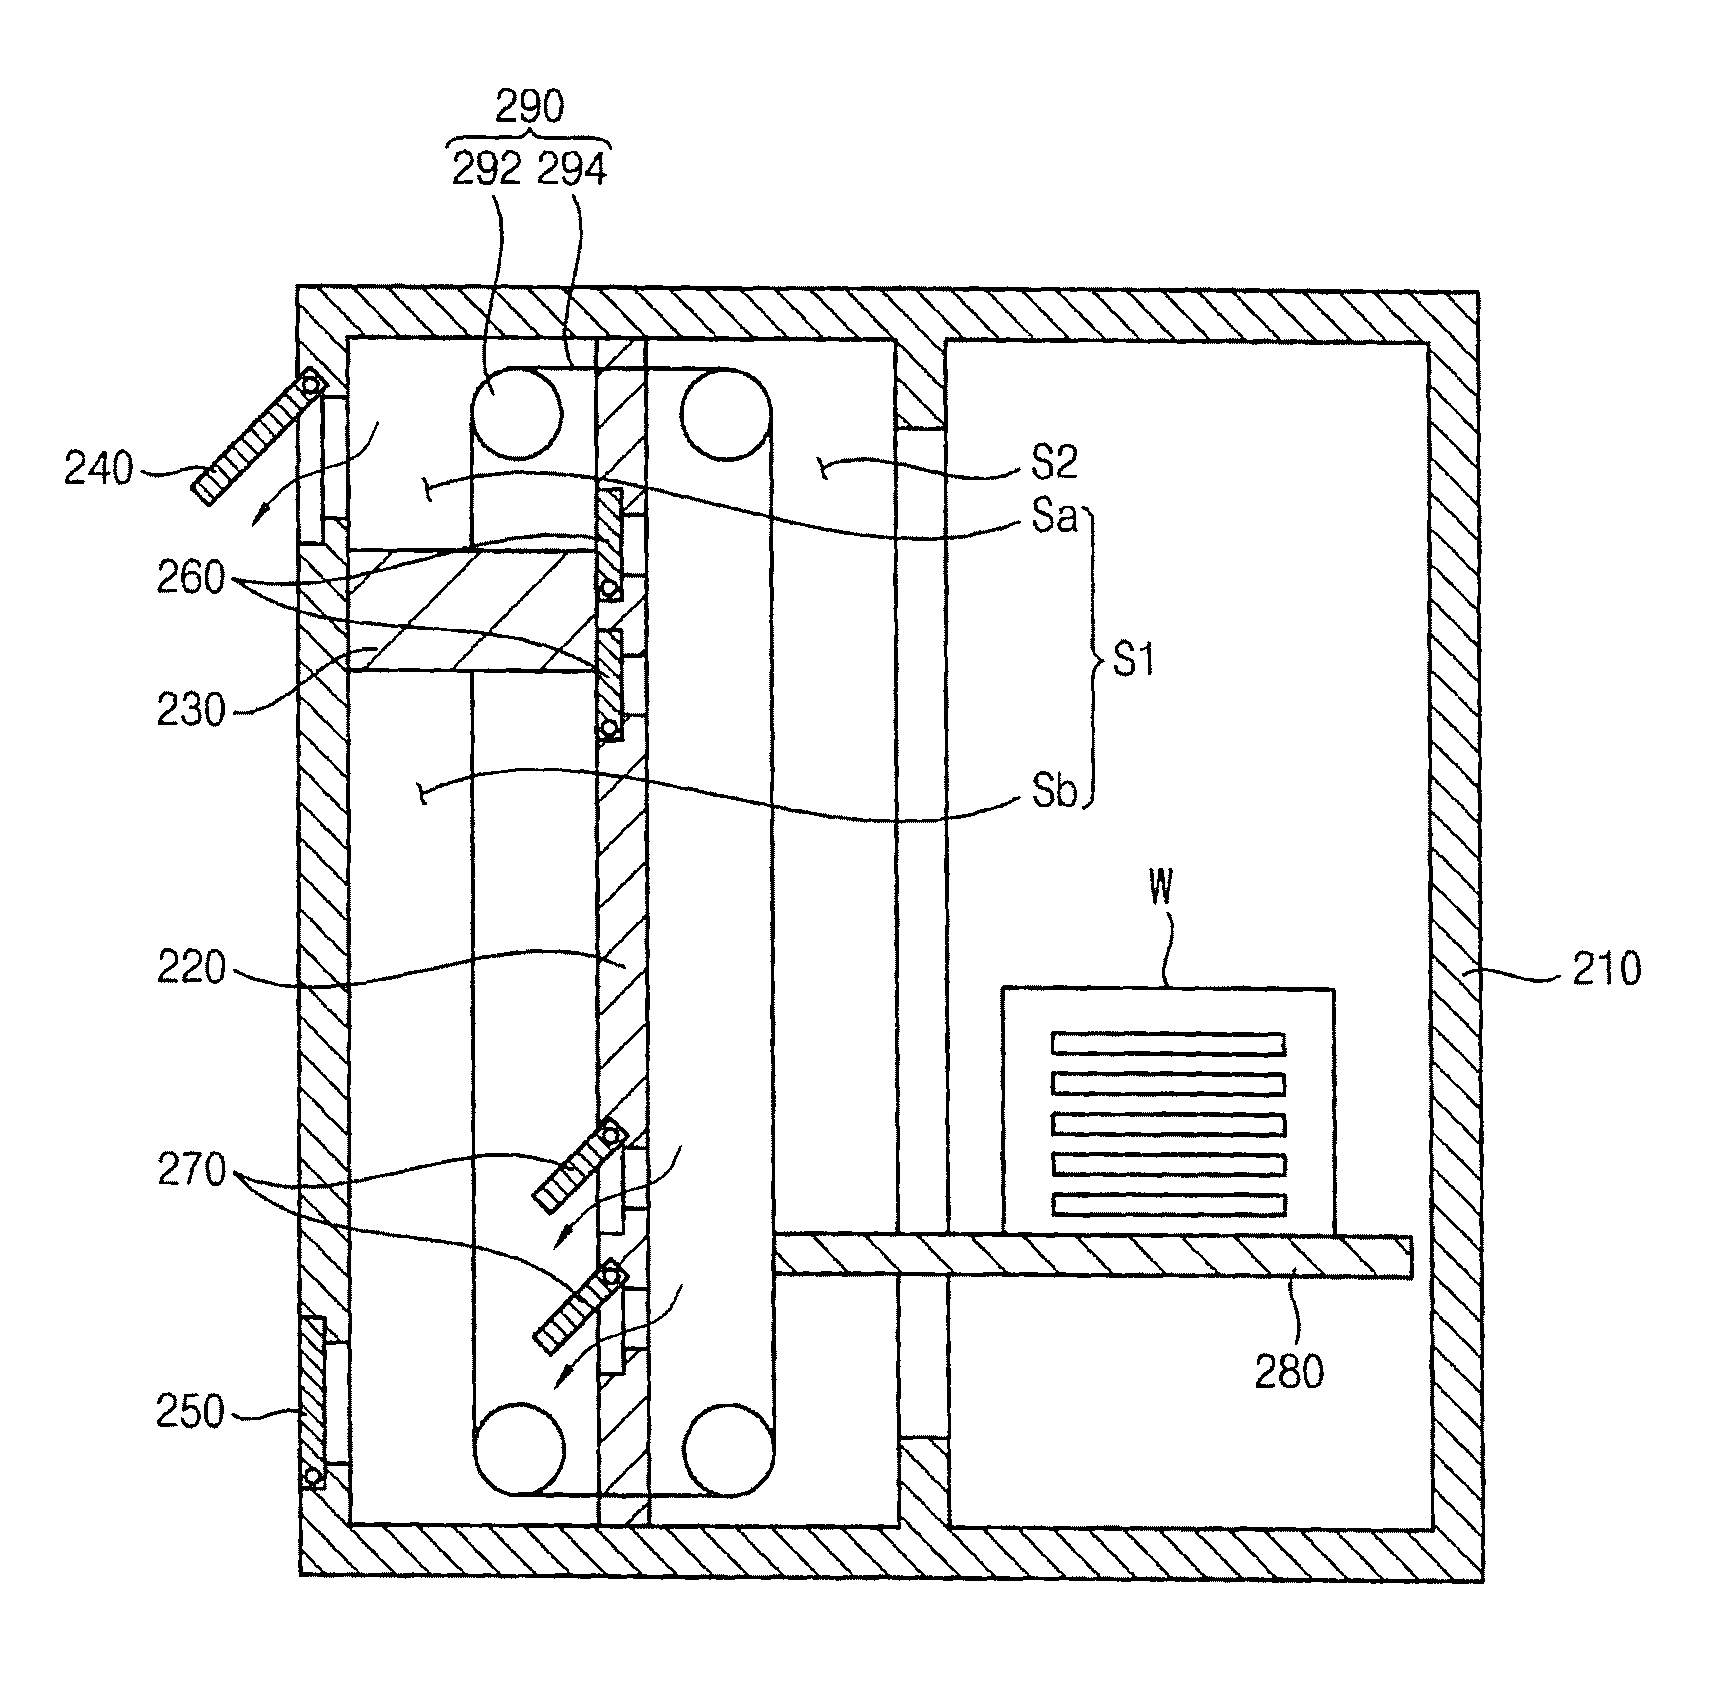 Unit for eliminating particles and apparatus for transferring a substrate having the same